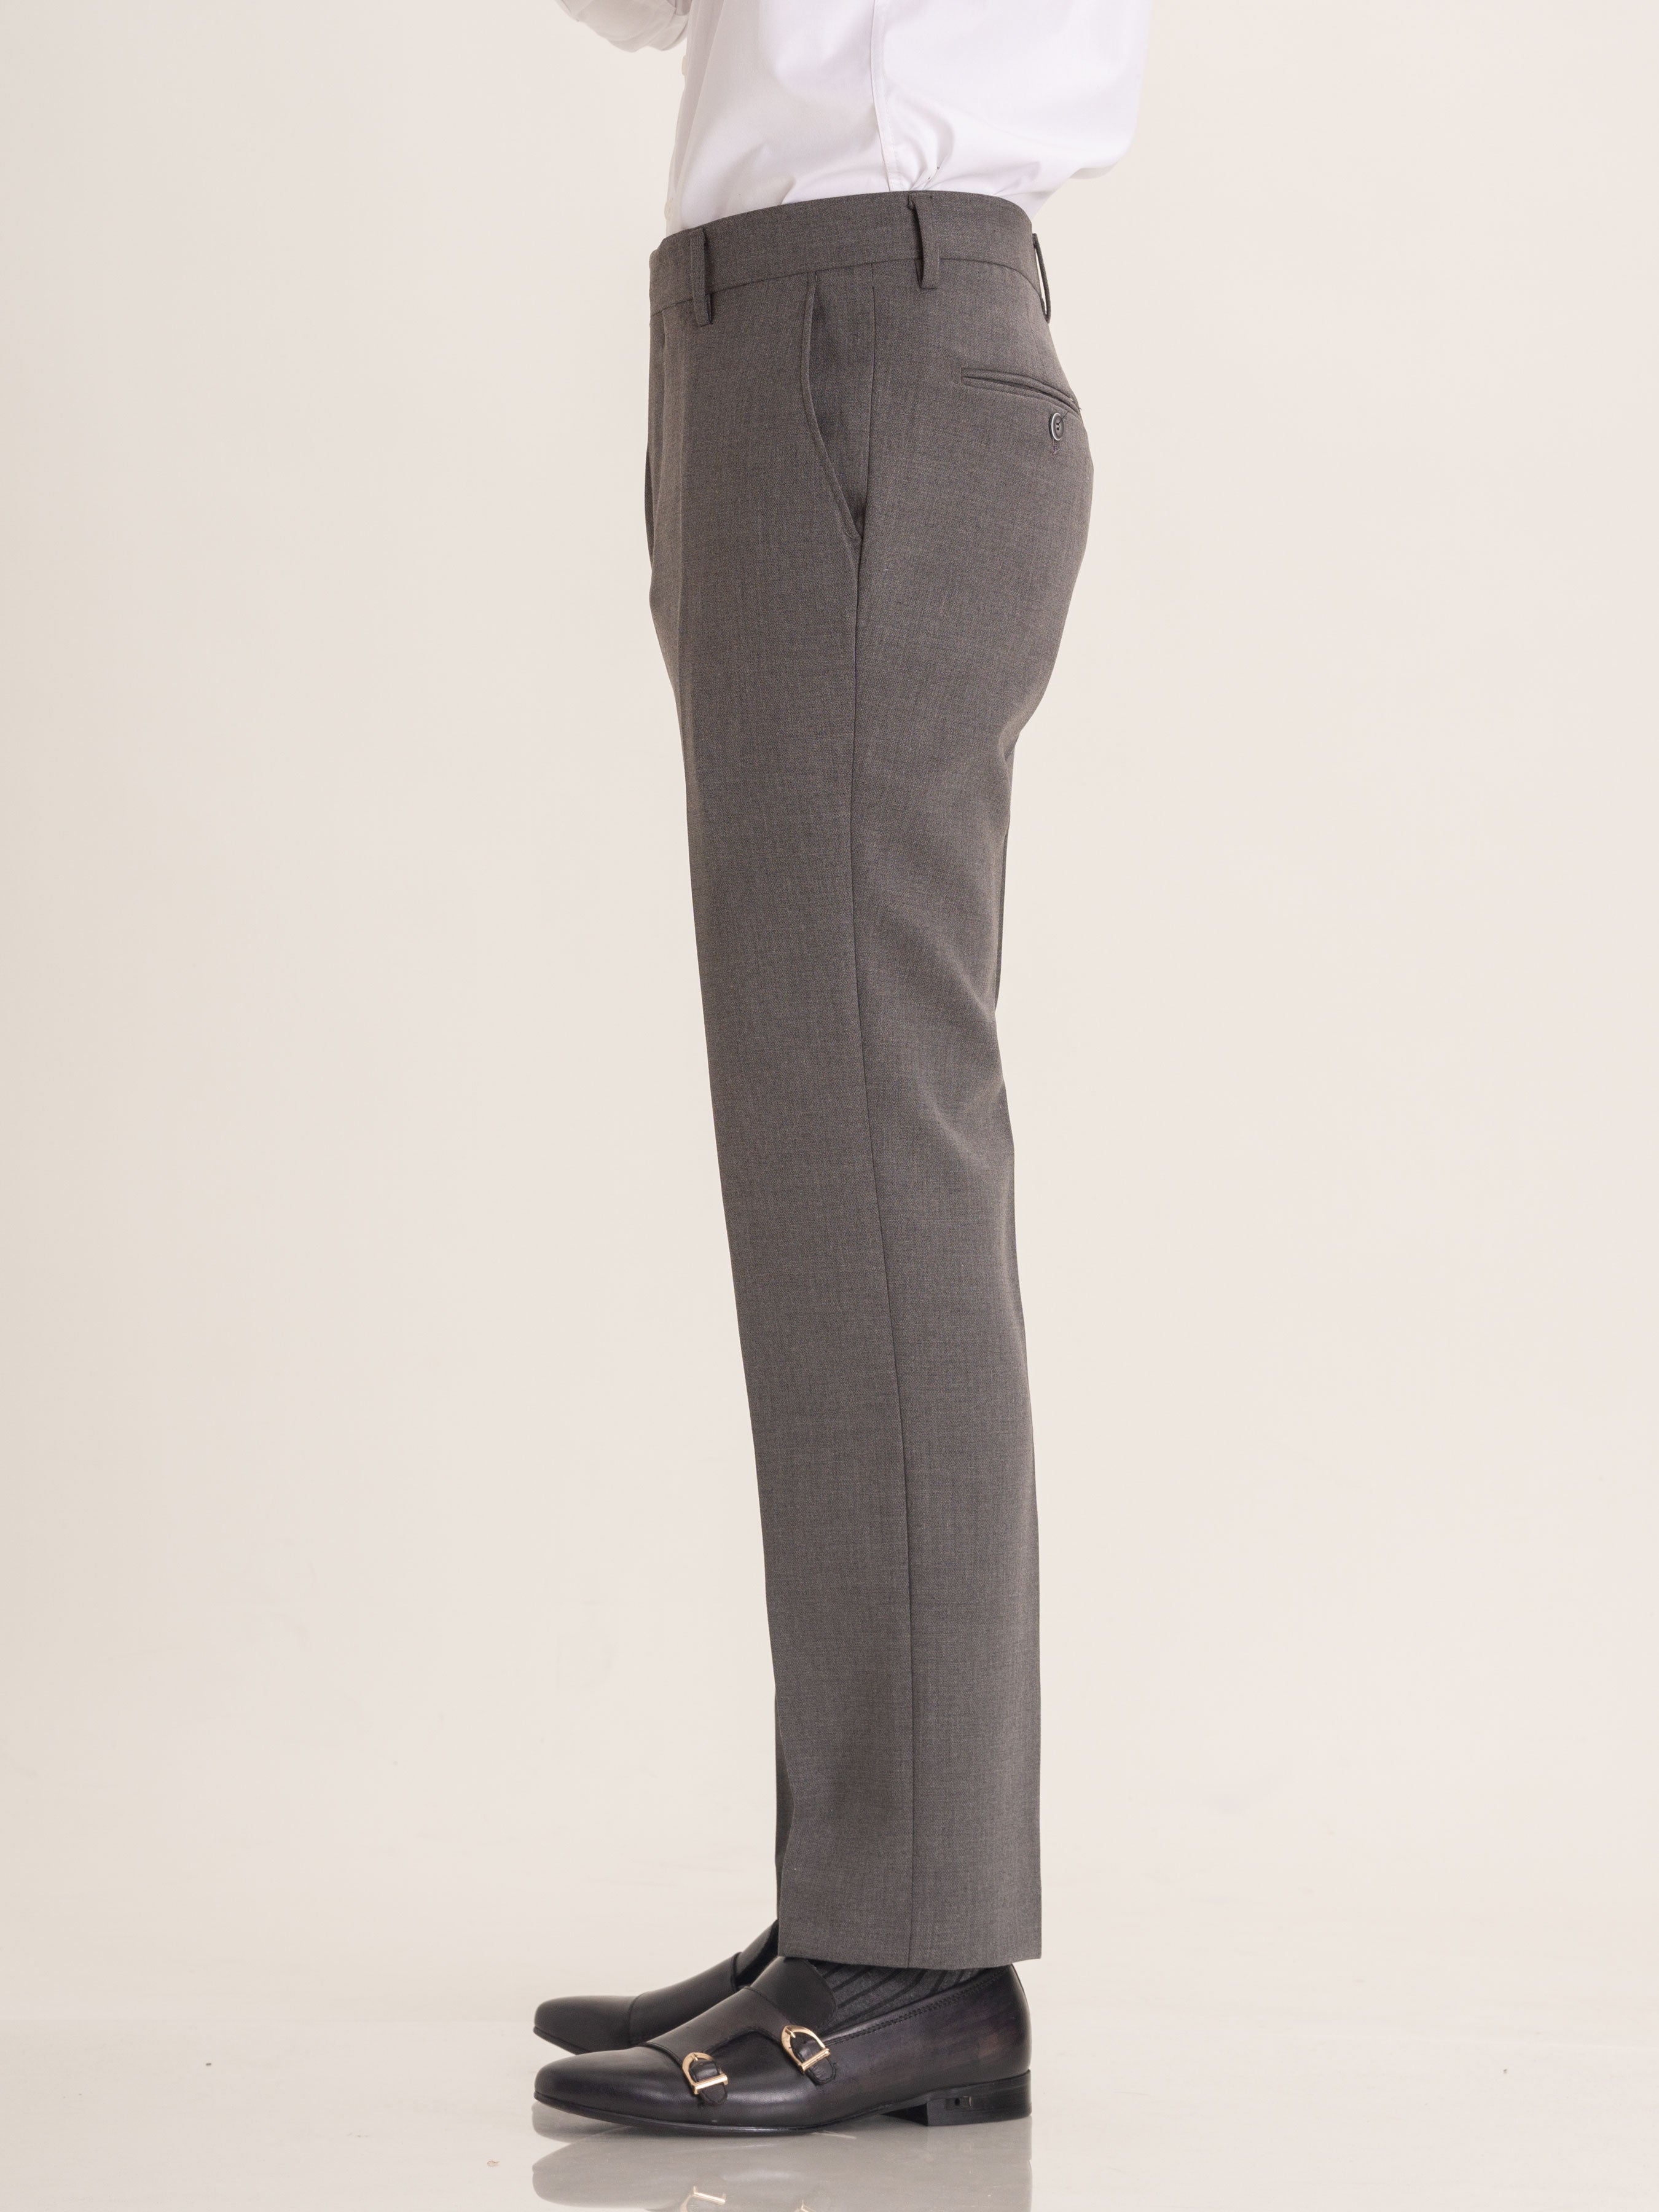 Trousers With Belt Loop - Grey Plain (Stretchable) - Zeve Shoes